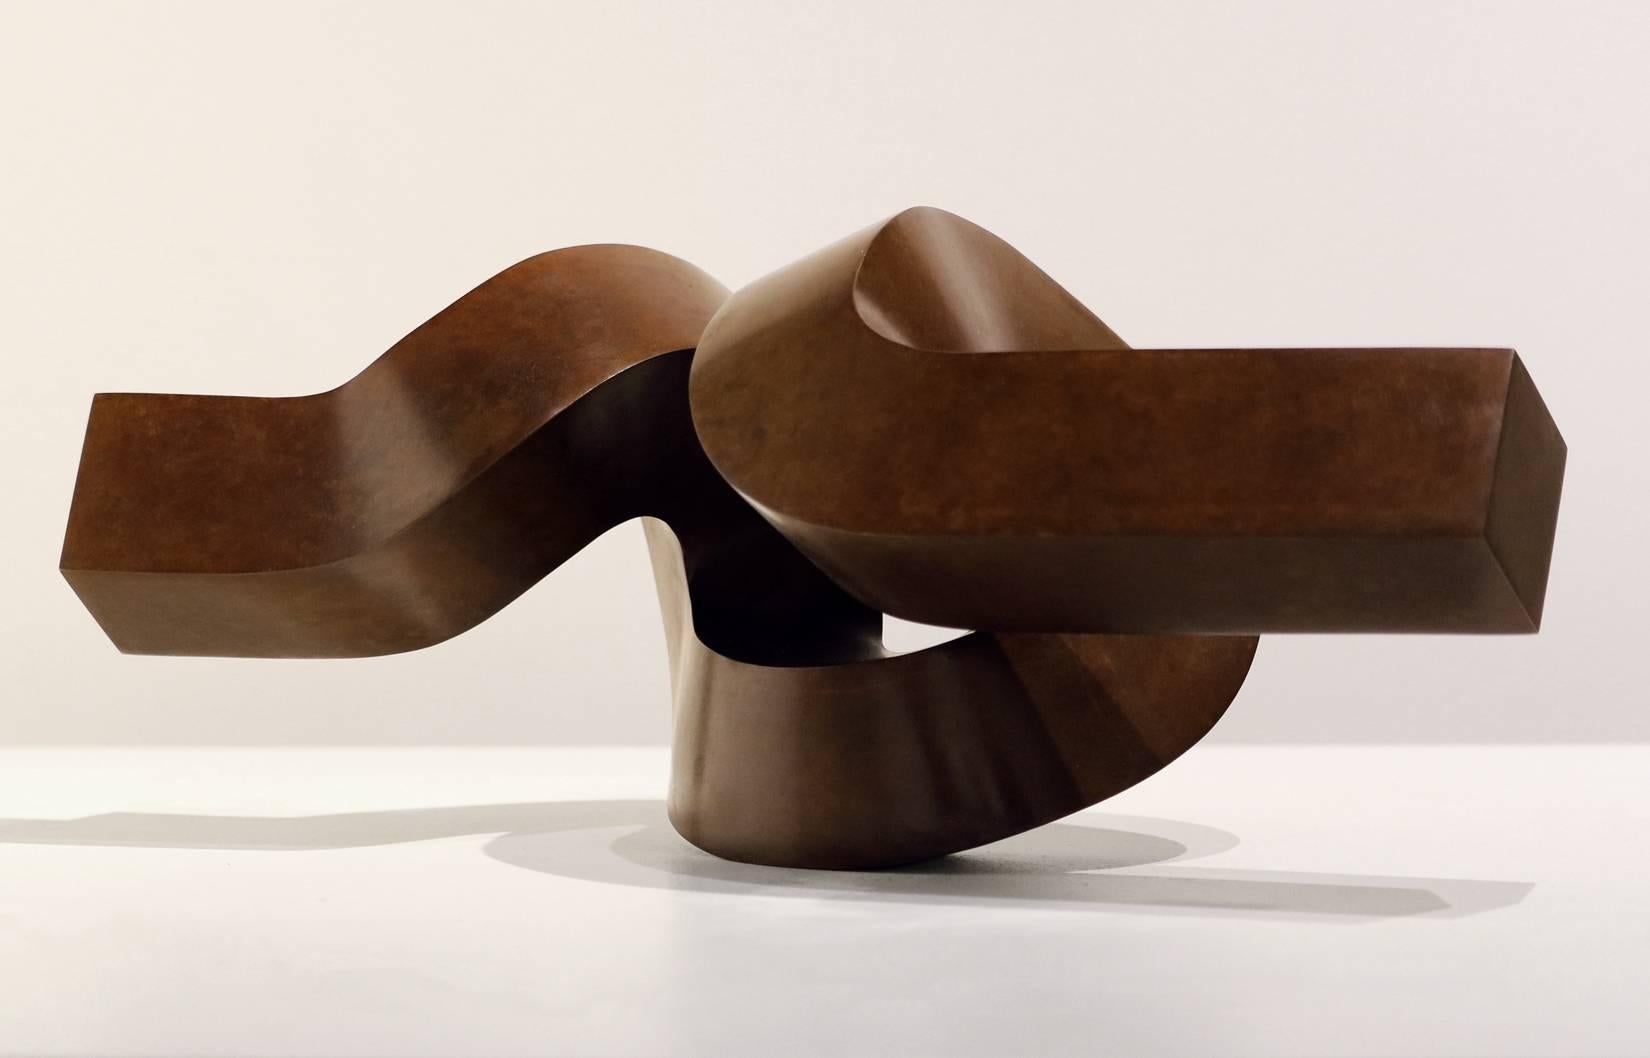 Riff - Sculpture by Clement Meadmore